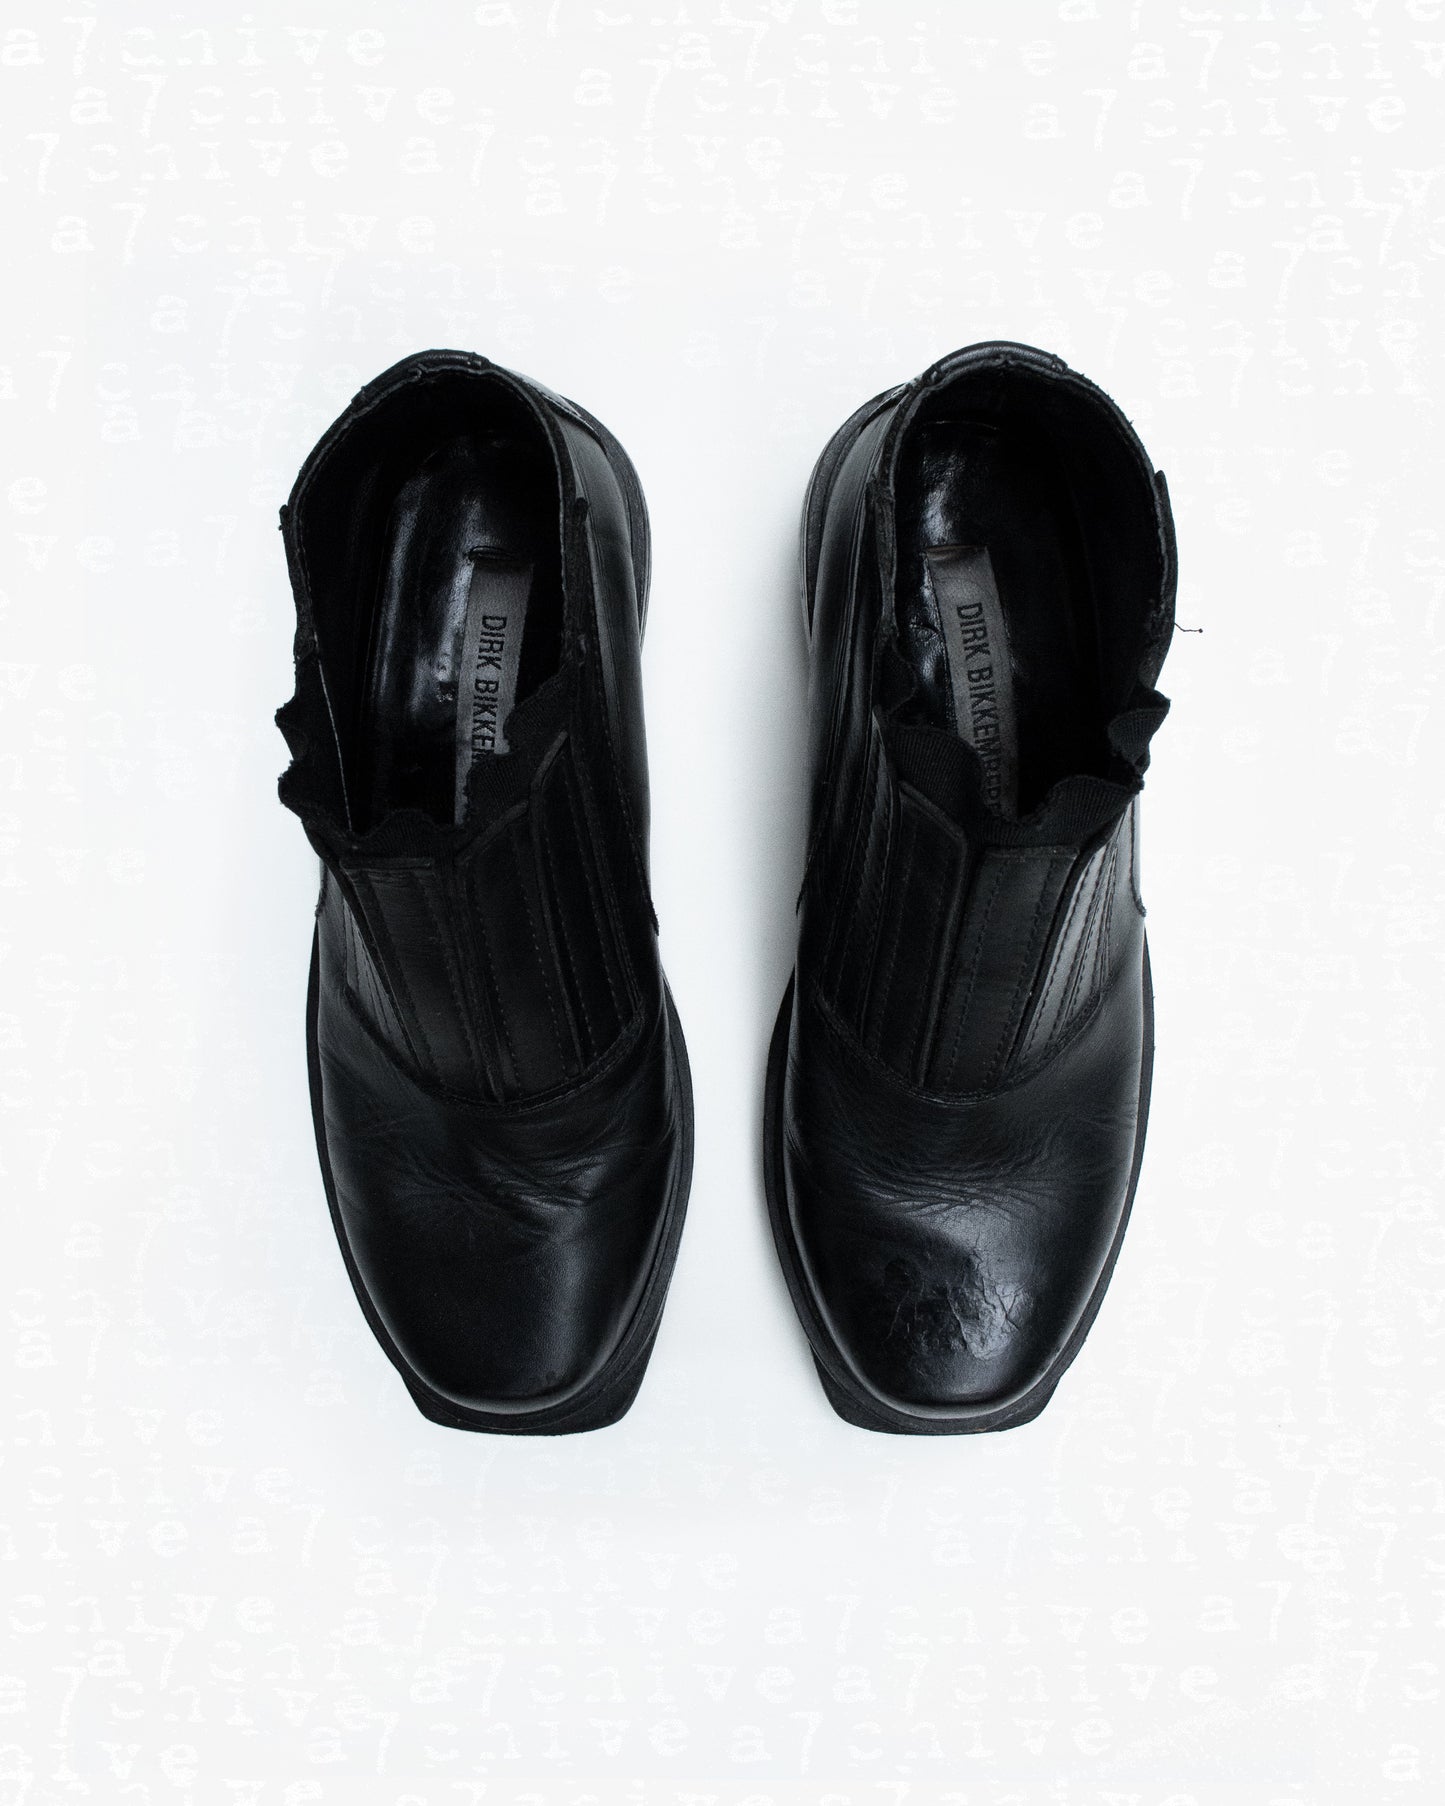 Dirk Bikkembergs Leather Slip-on Boots - S/S 1998